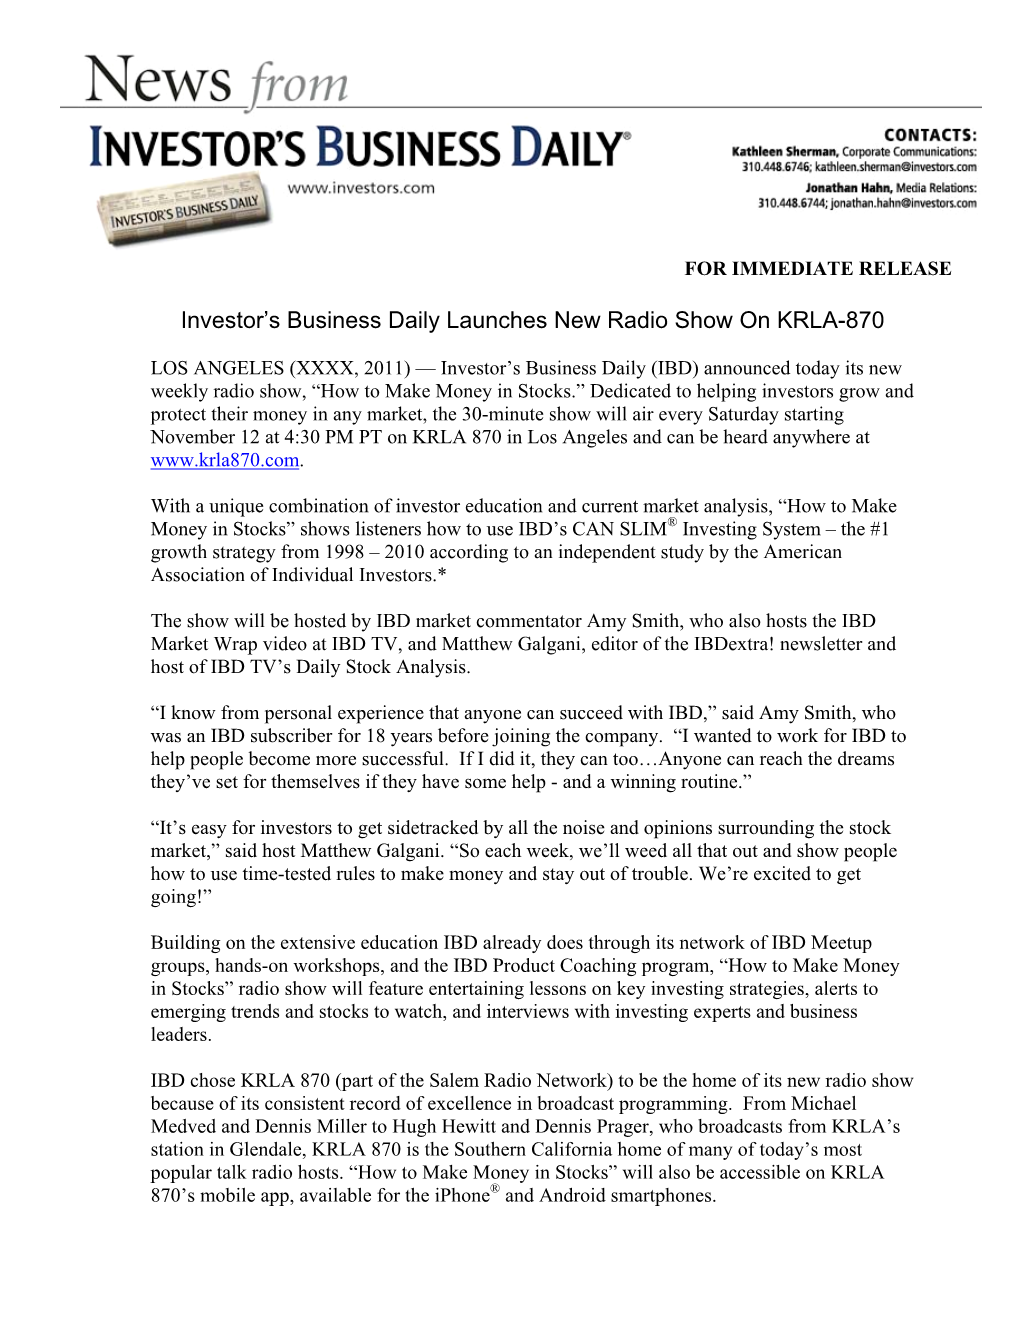 11/09/2011 Investor's Business Daily Launches New Radio Show On